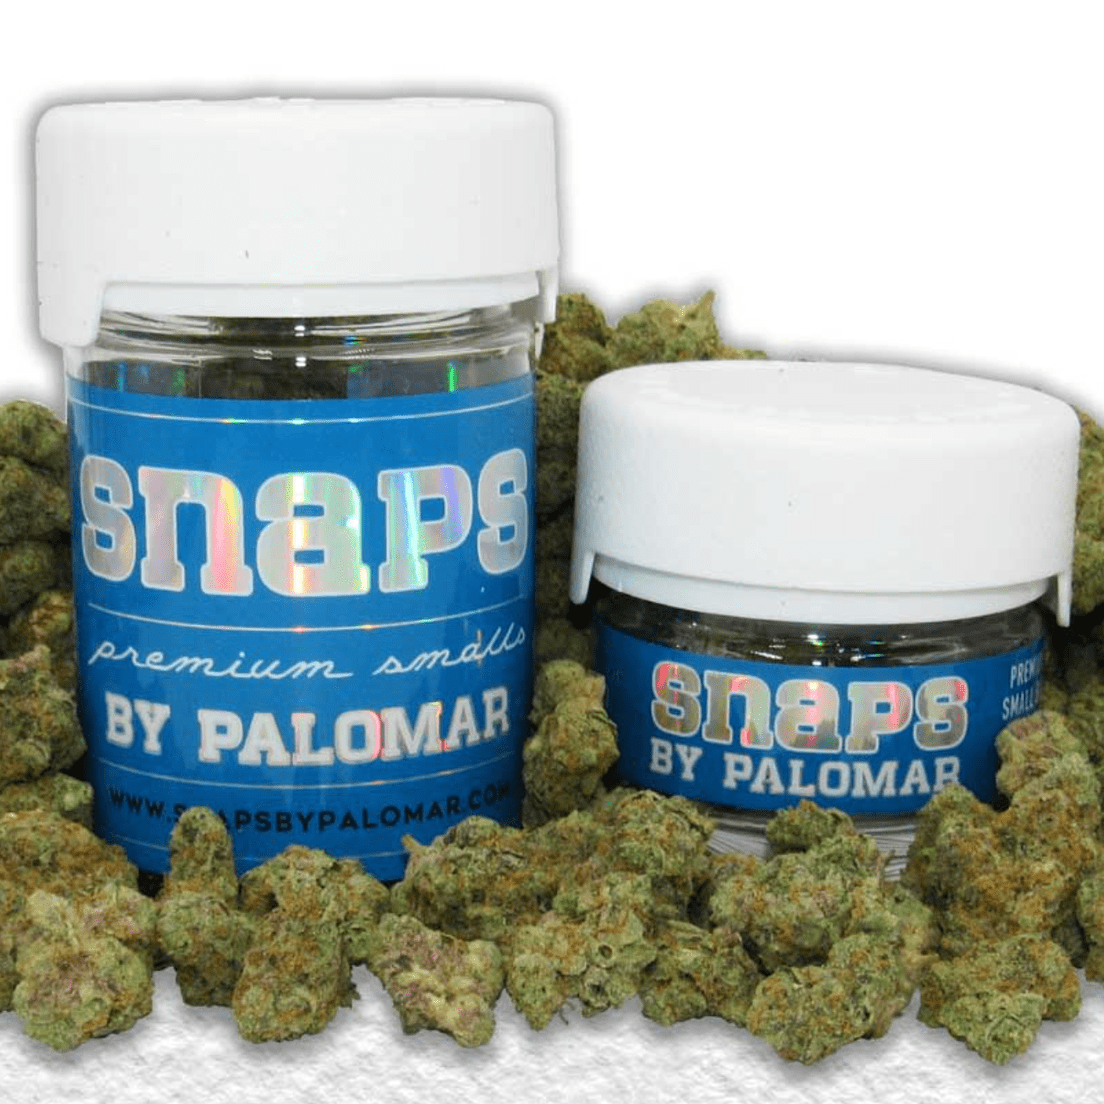 A. Snaps by Palomar 14g Shake - The Soap